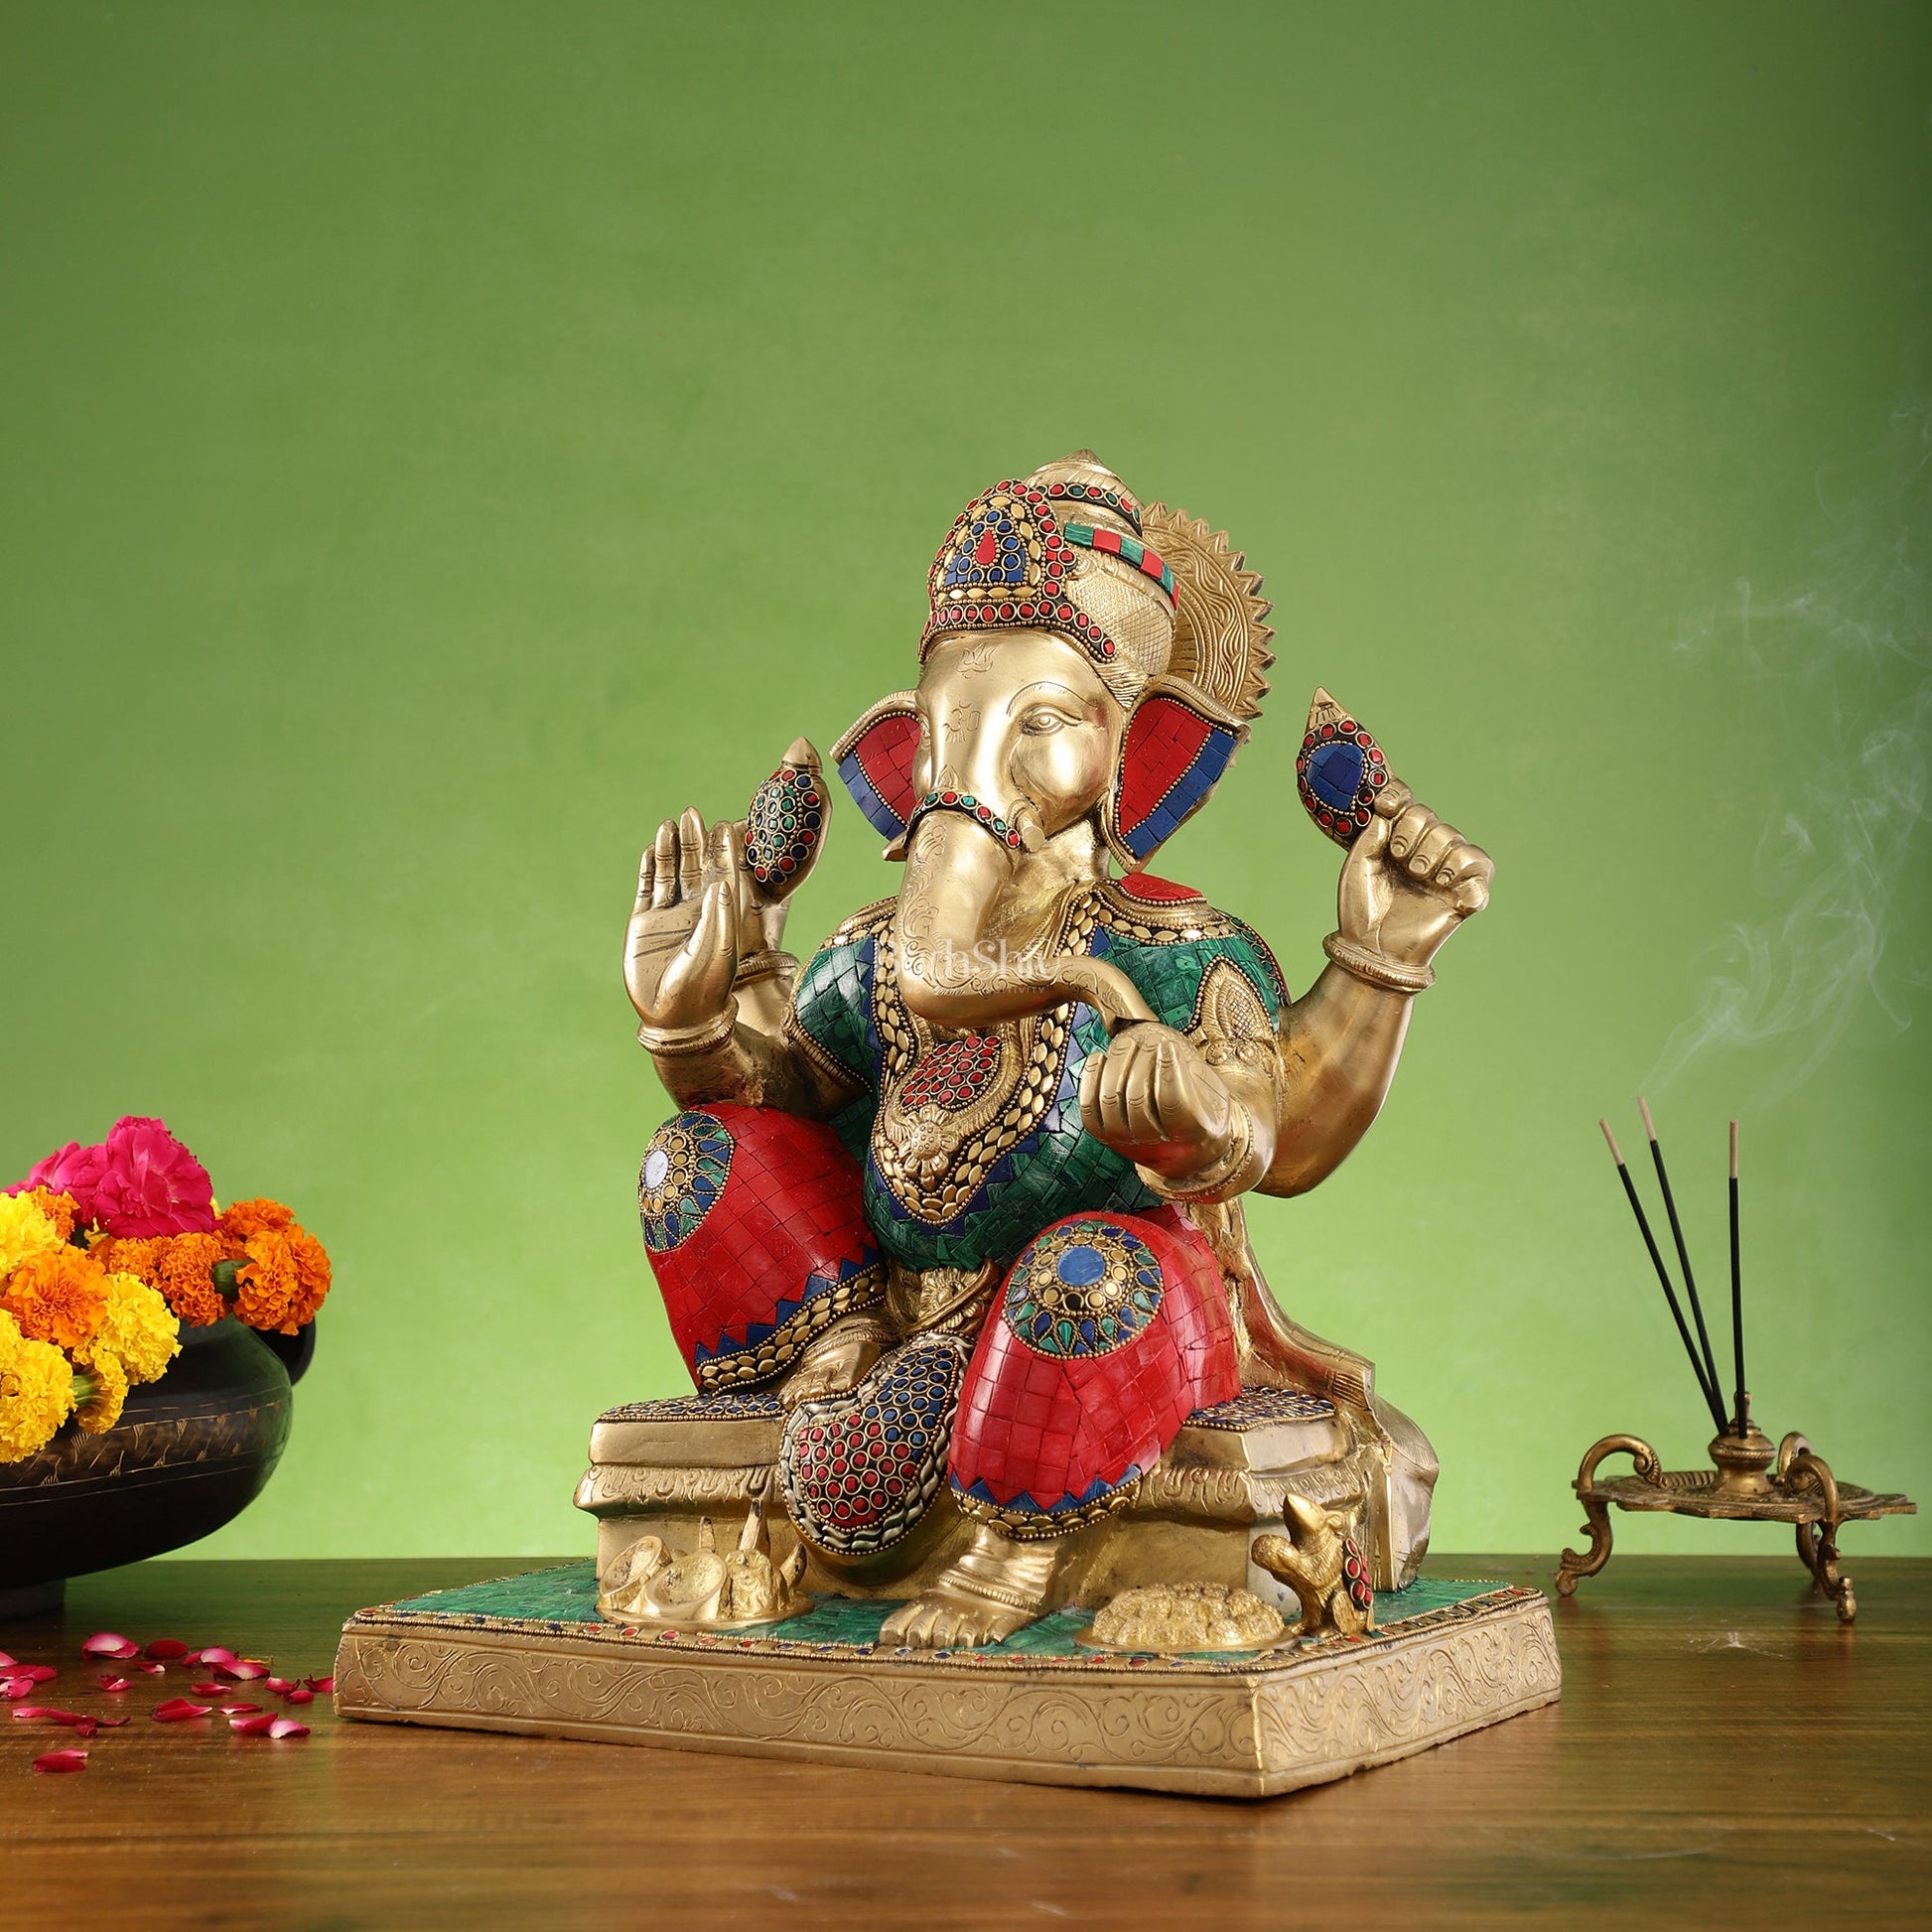 Brass Handcrafted Lord Ganesha Statue with Colorful Stonework - 16 inch - Budhshiv.com